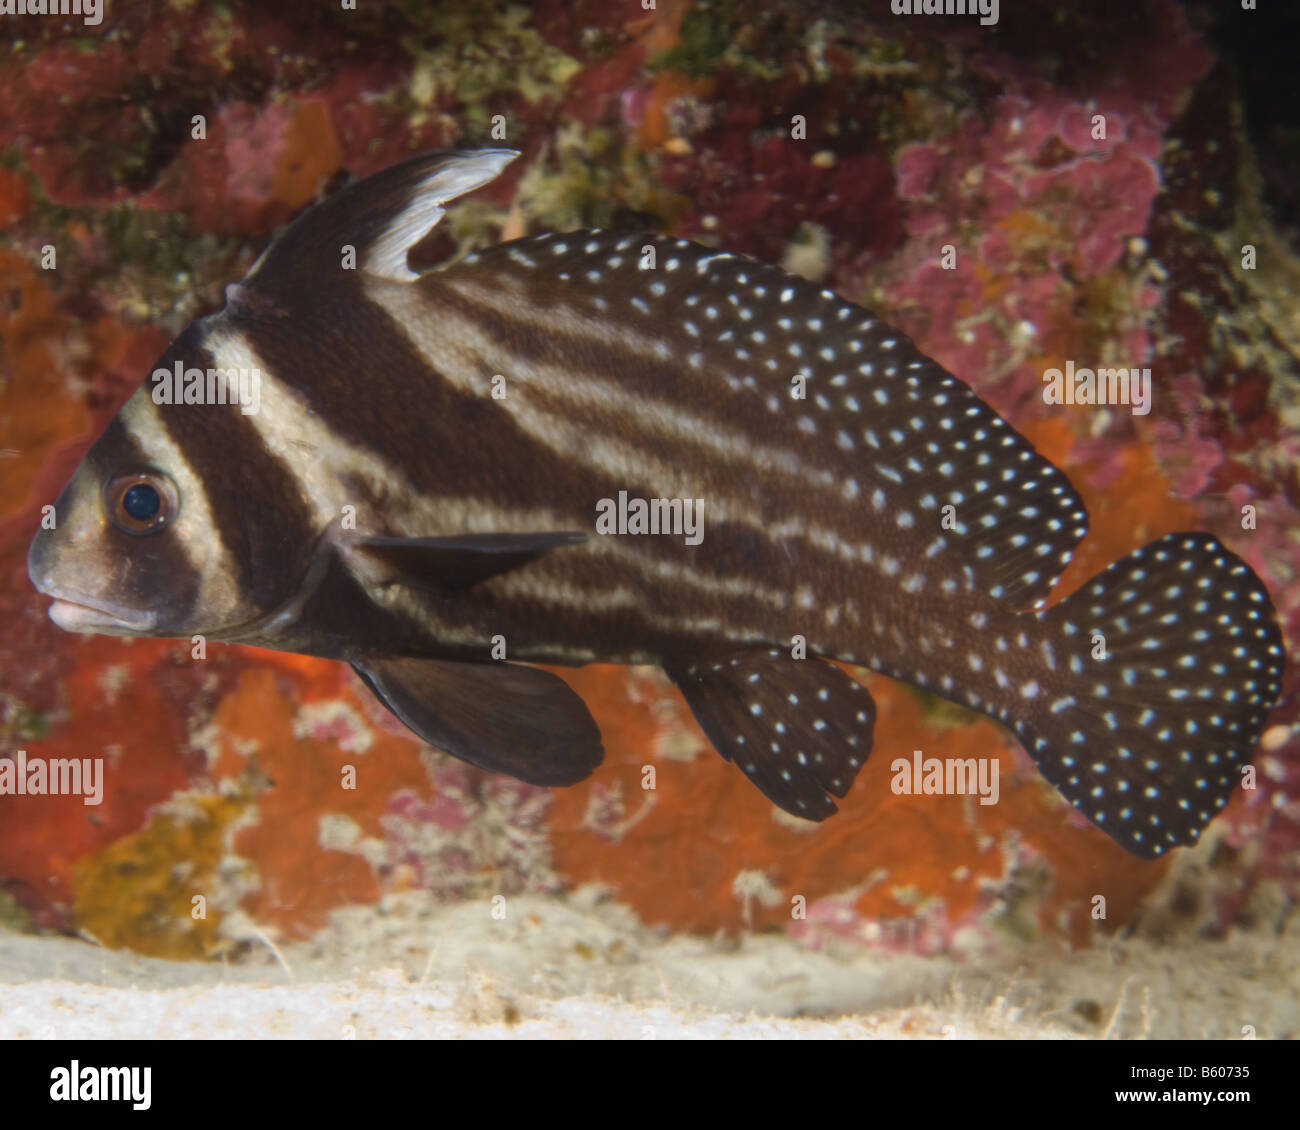 Profile view of a Spotted Drum, Equetus punctatus. Stock Photo